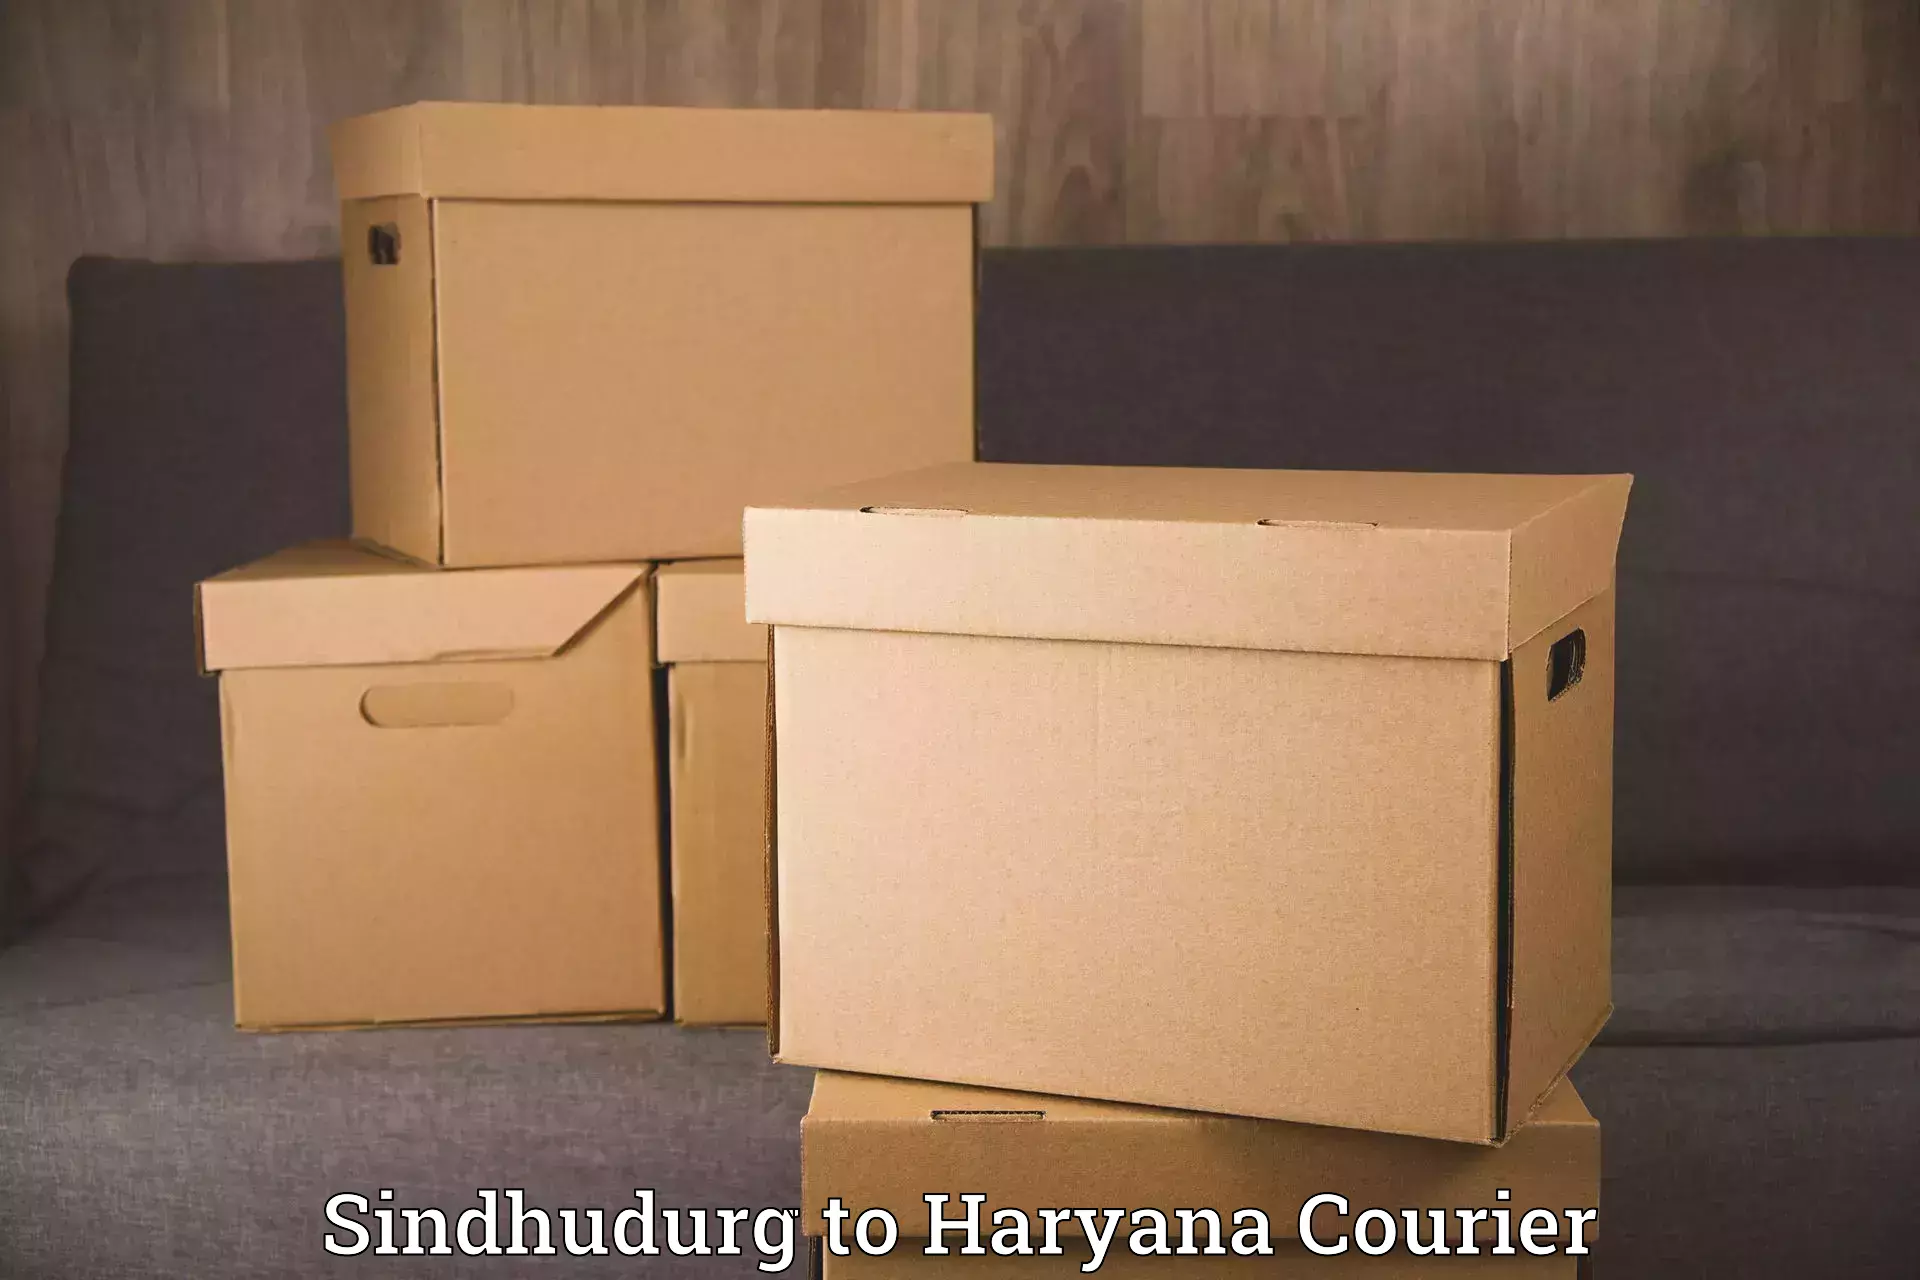 Trusted moving company Sindhudurg to Dharuhera